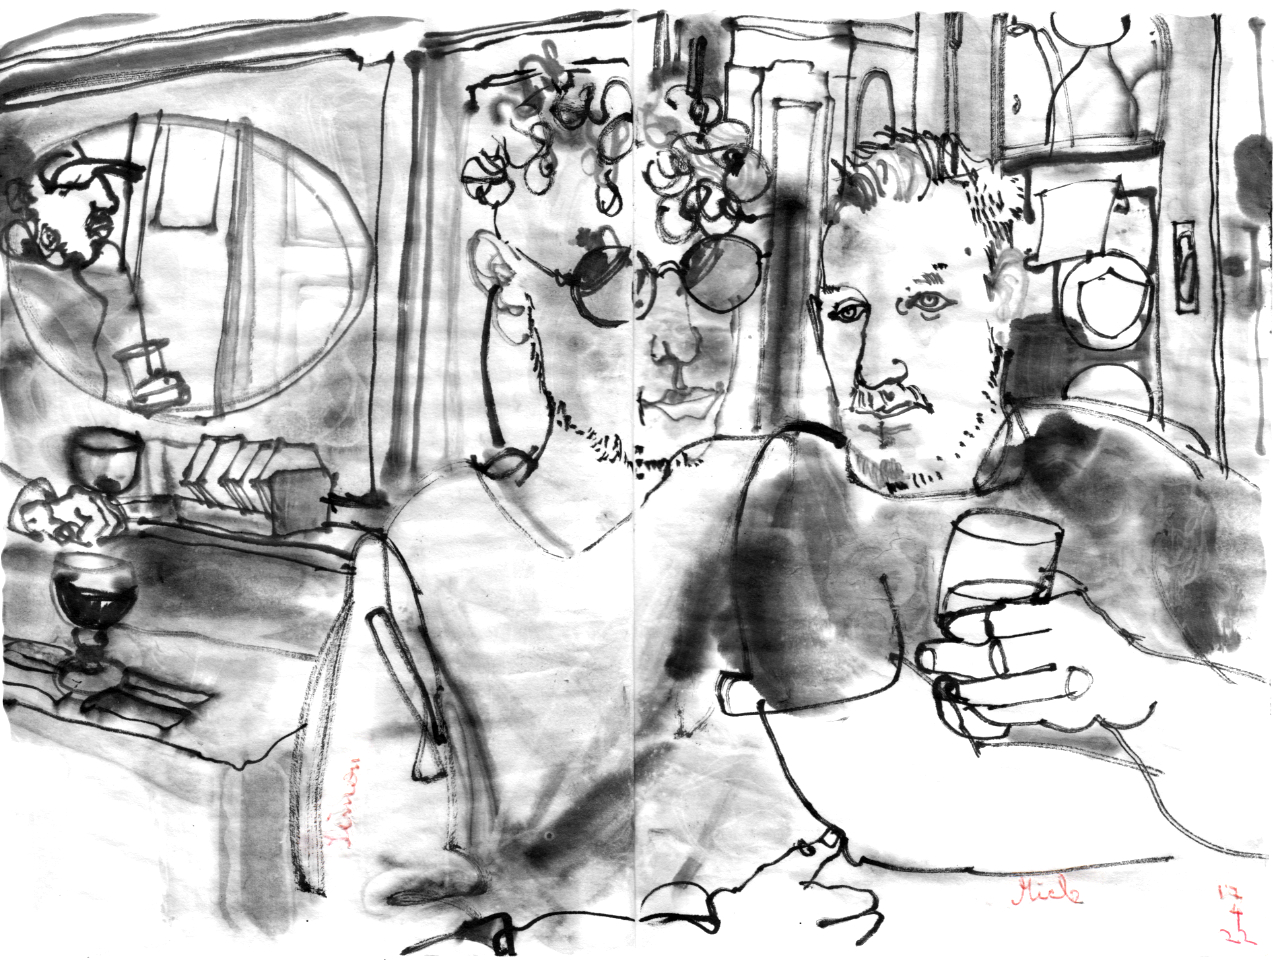 ink drawing of two young men in a belgish pub